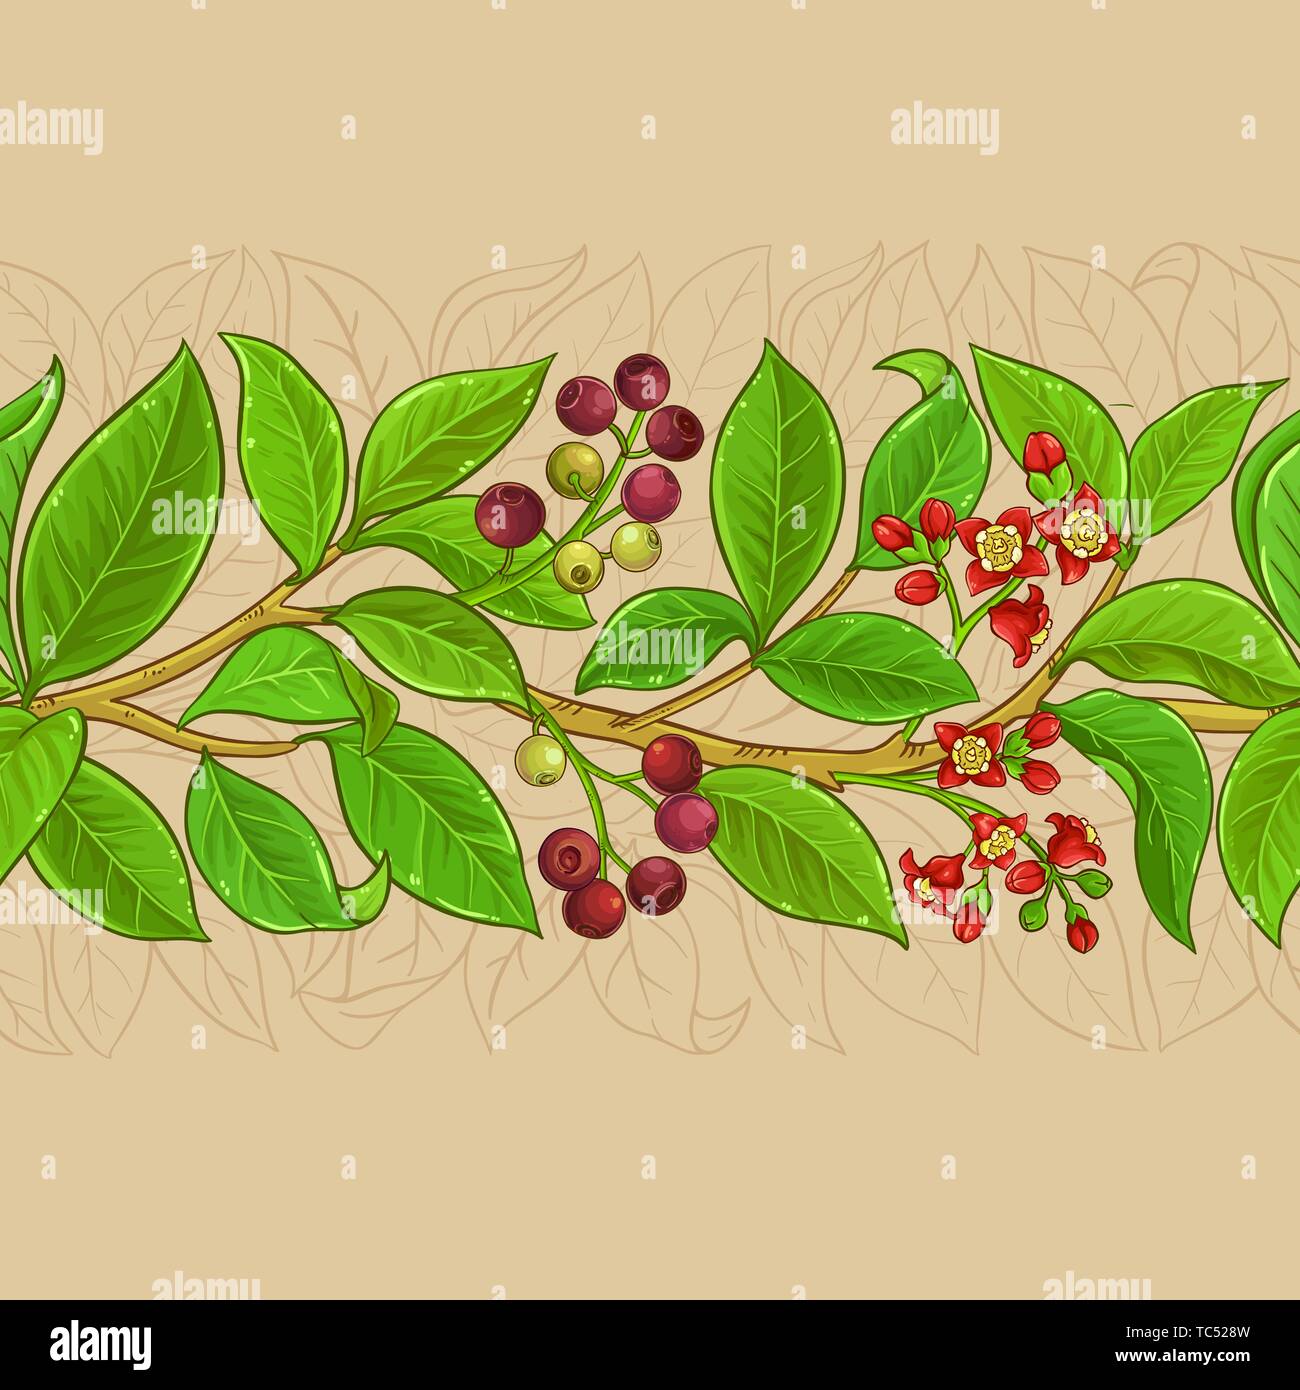 sandalwood vector pattern on color background Stock Vector